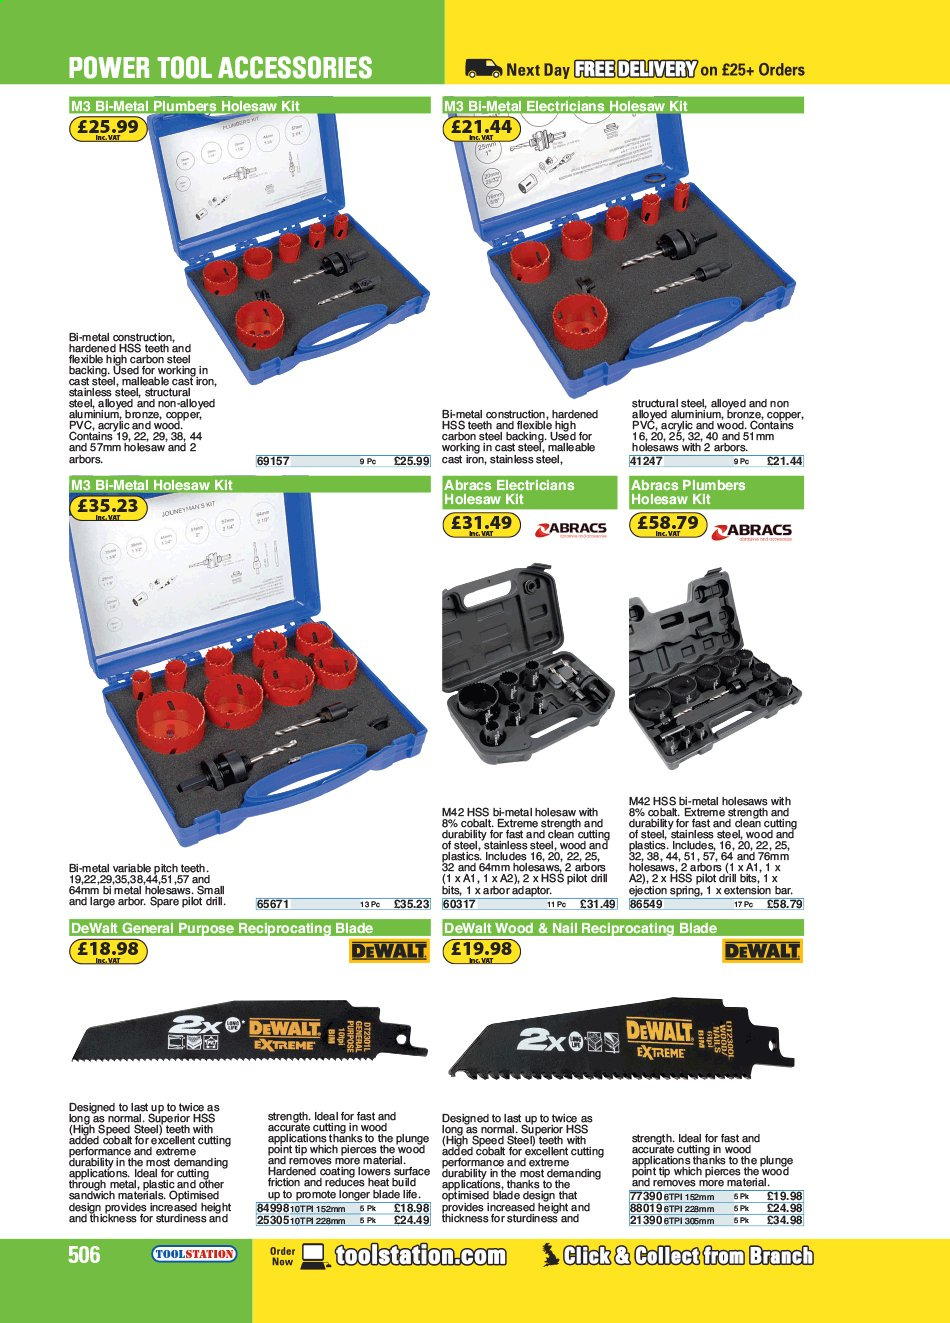 Toolstation offer . Page 506.